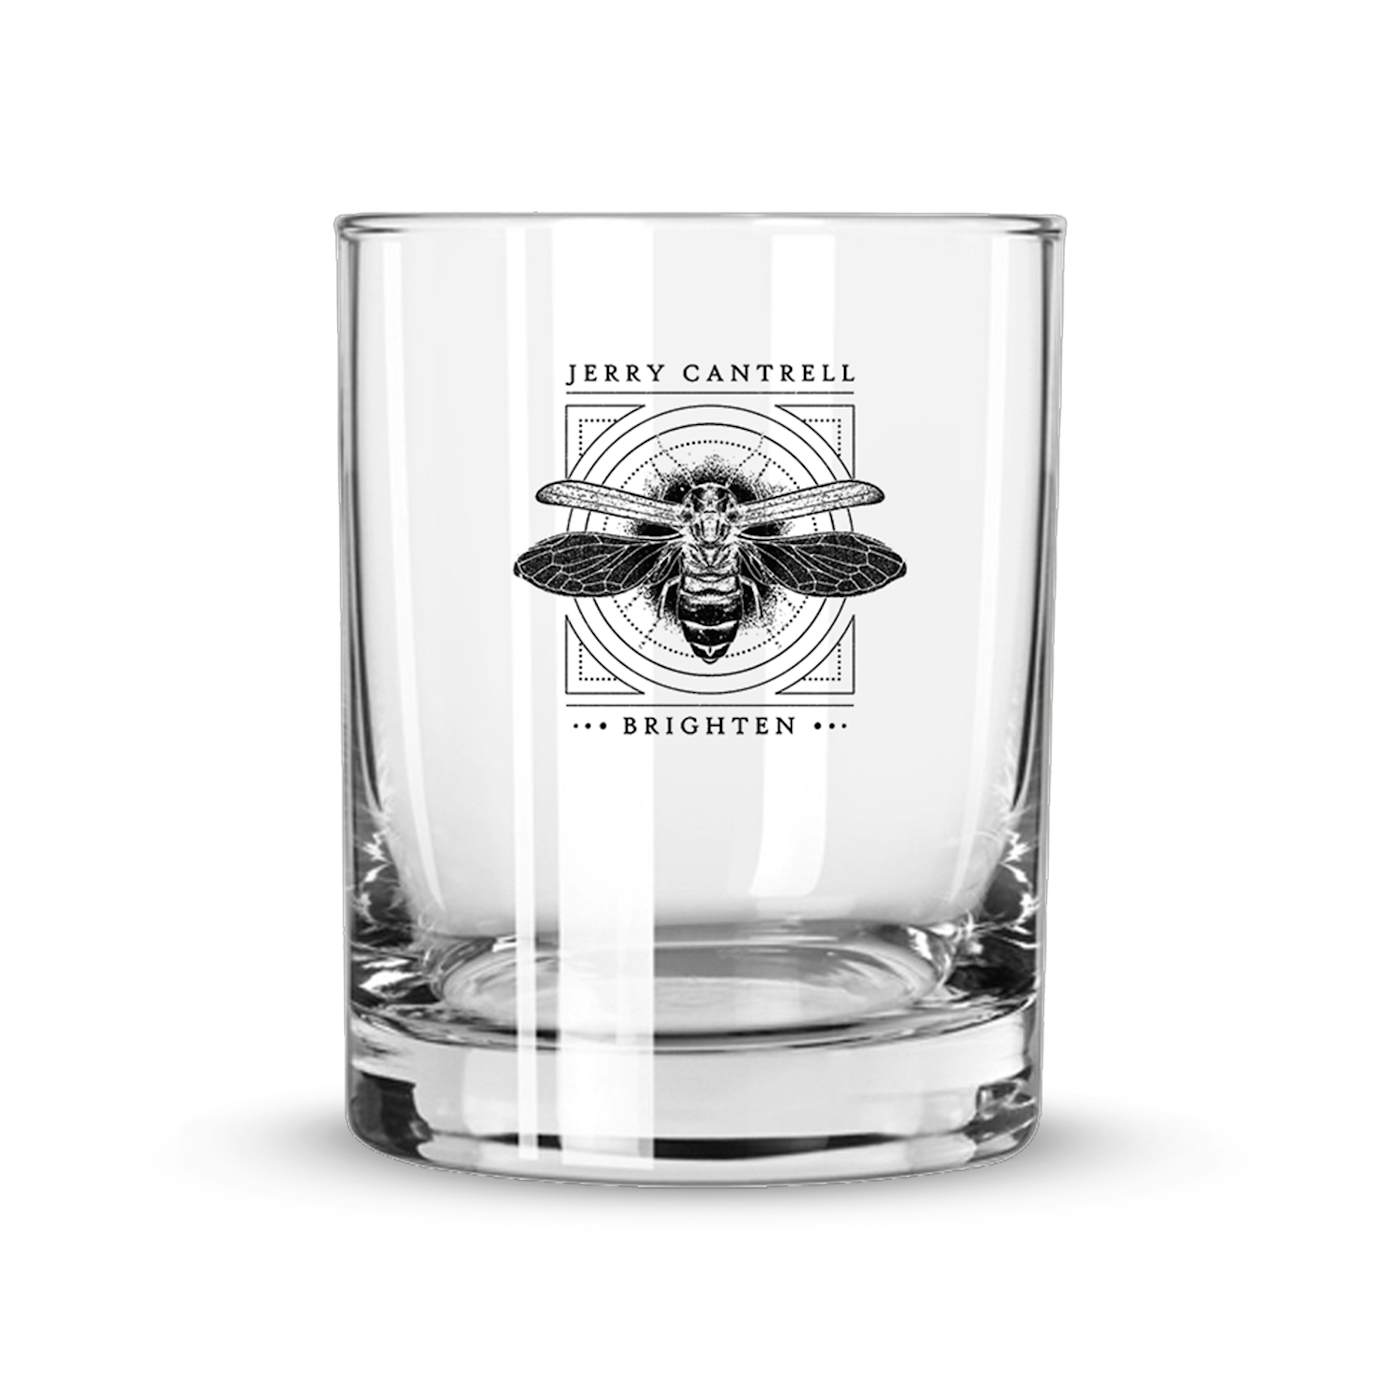 Jerry Cantrell Brighten Firefly Whiskey Glass